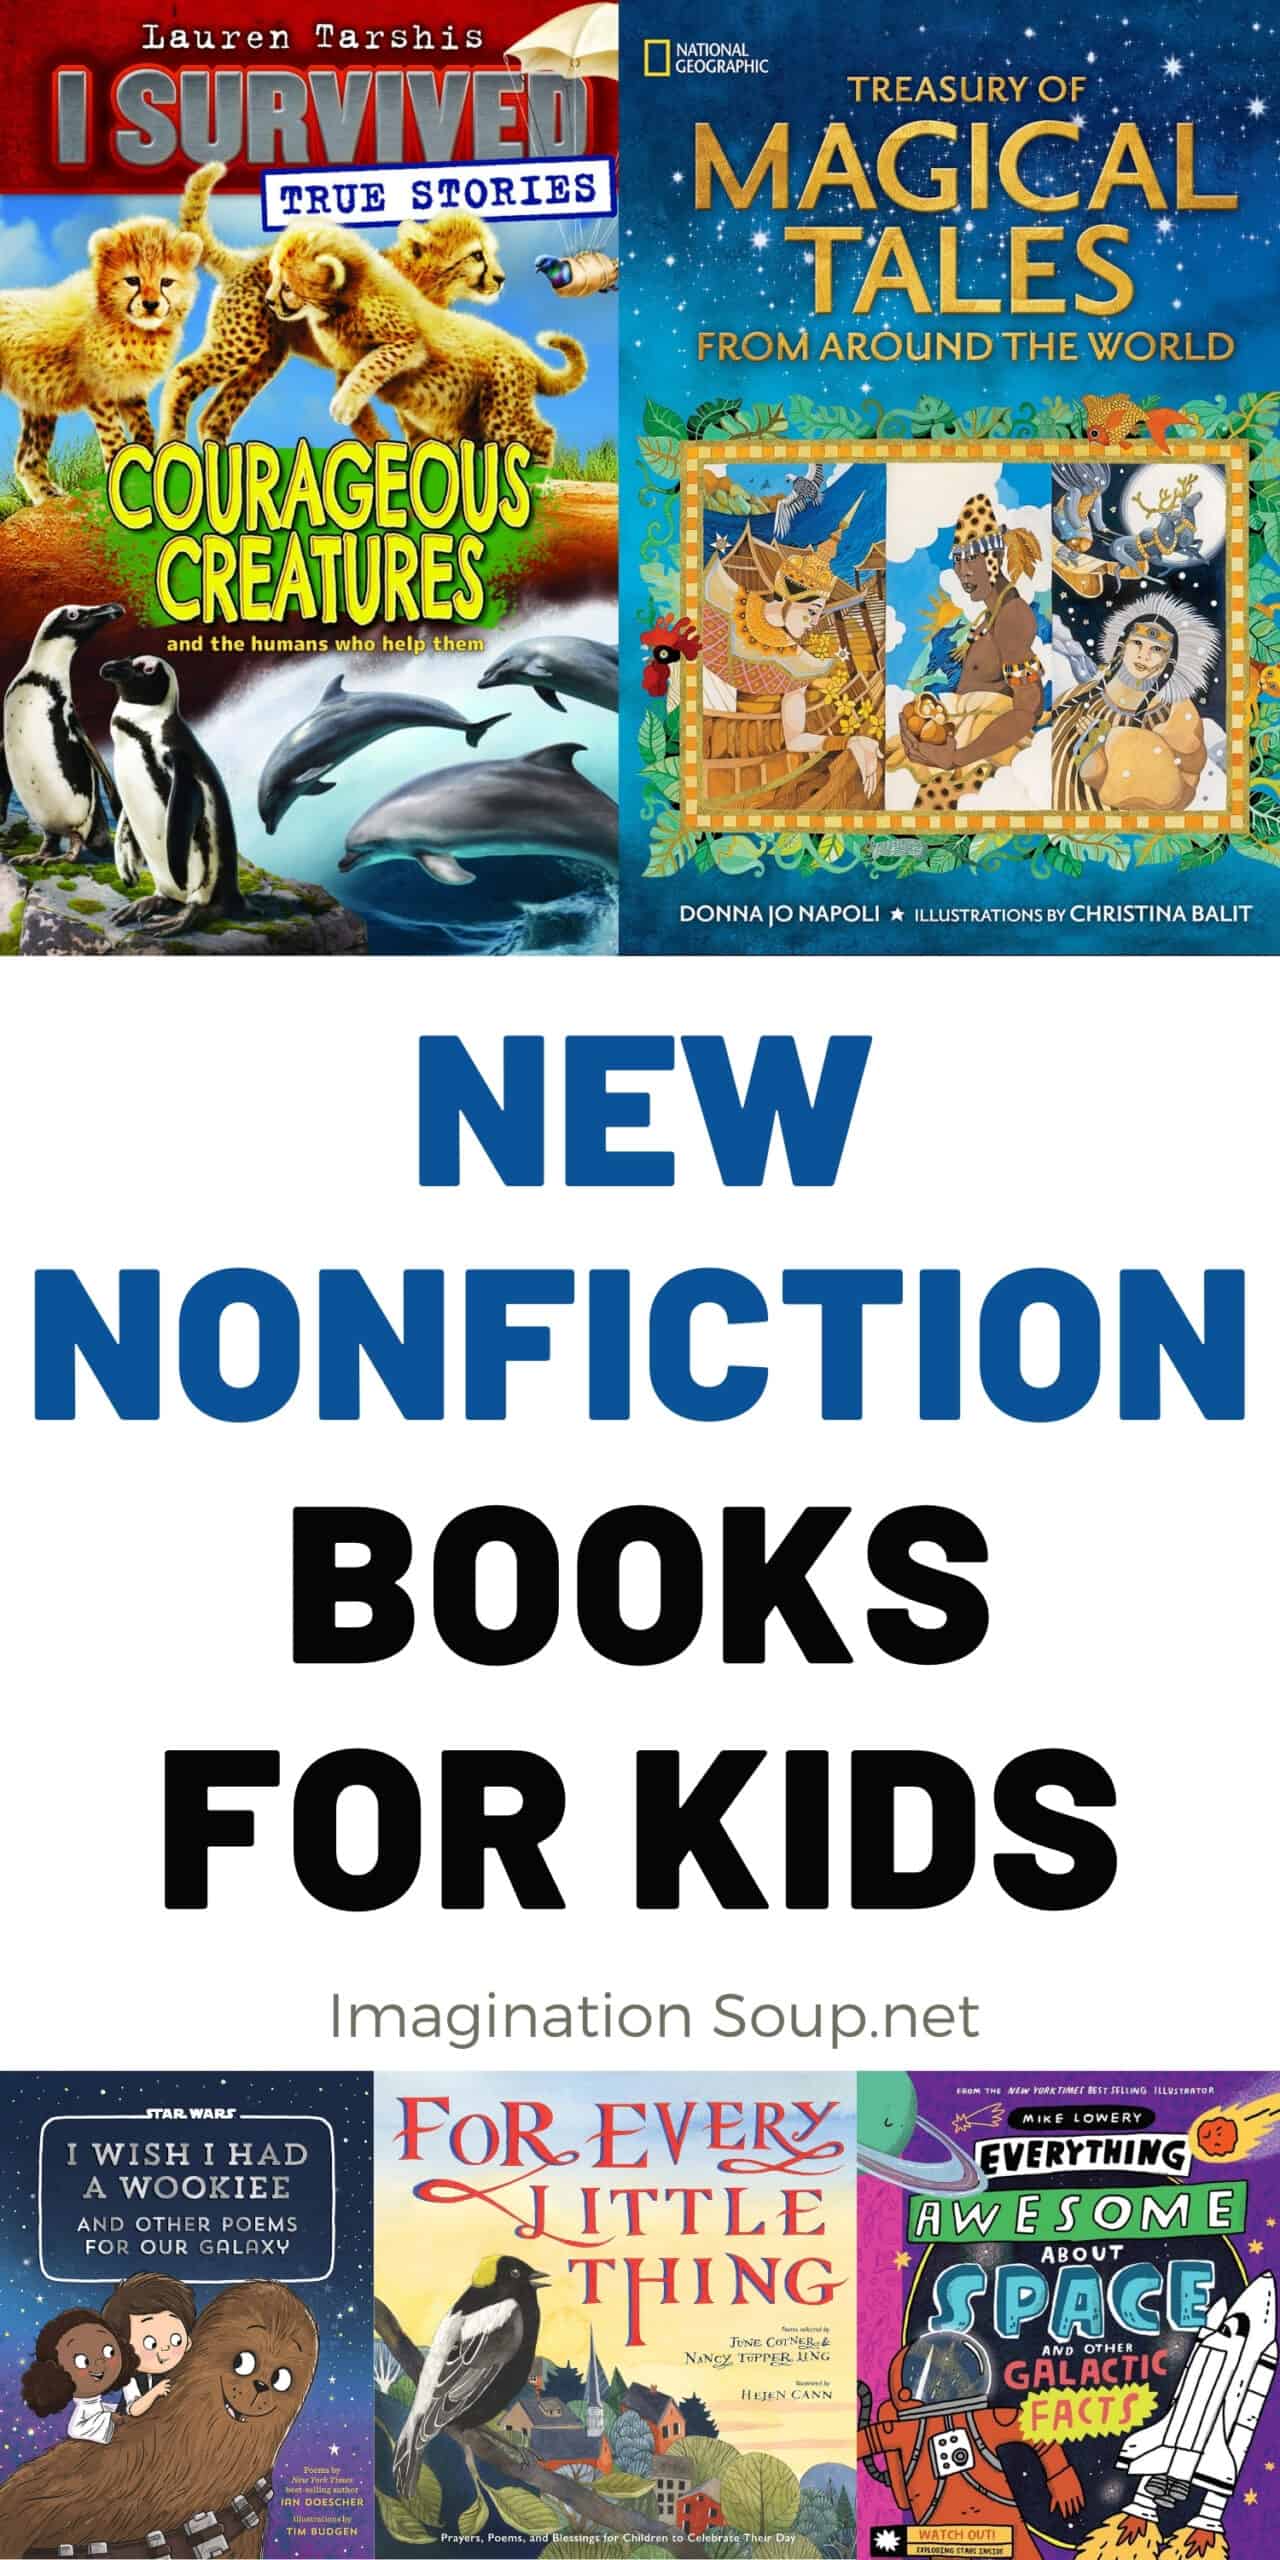 NEW NONFICTION BOOKS FOR KIDS FALL 2021